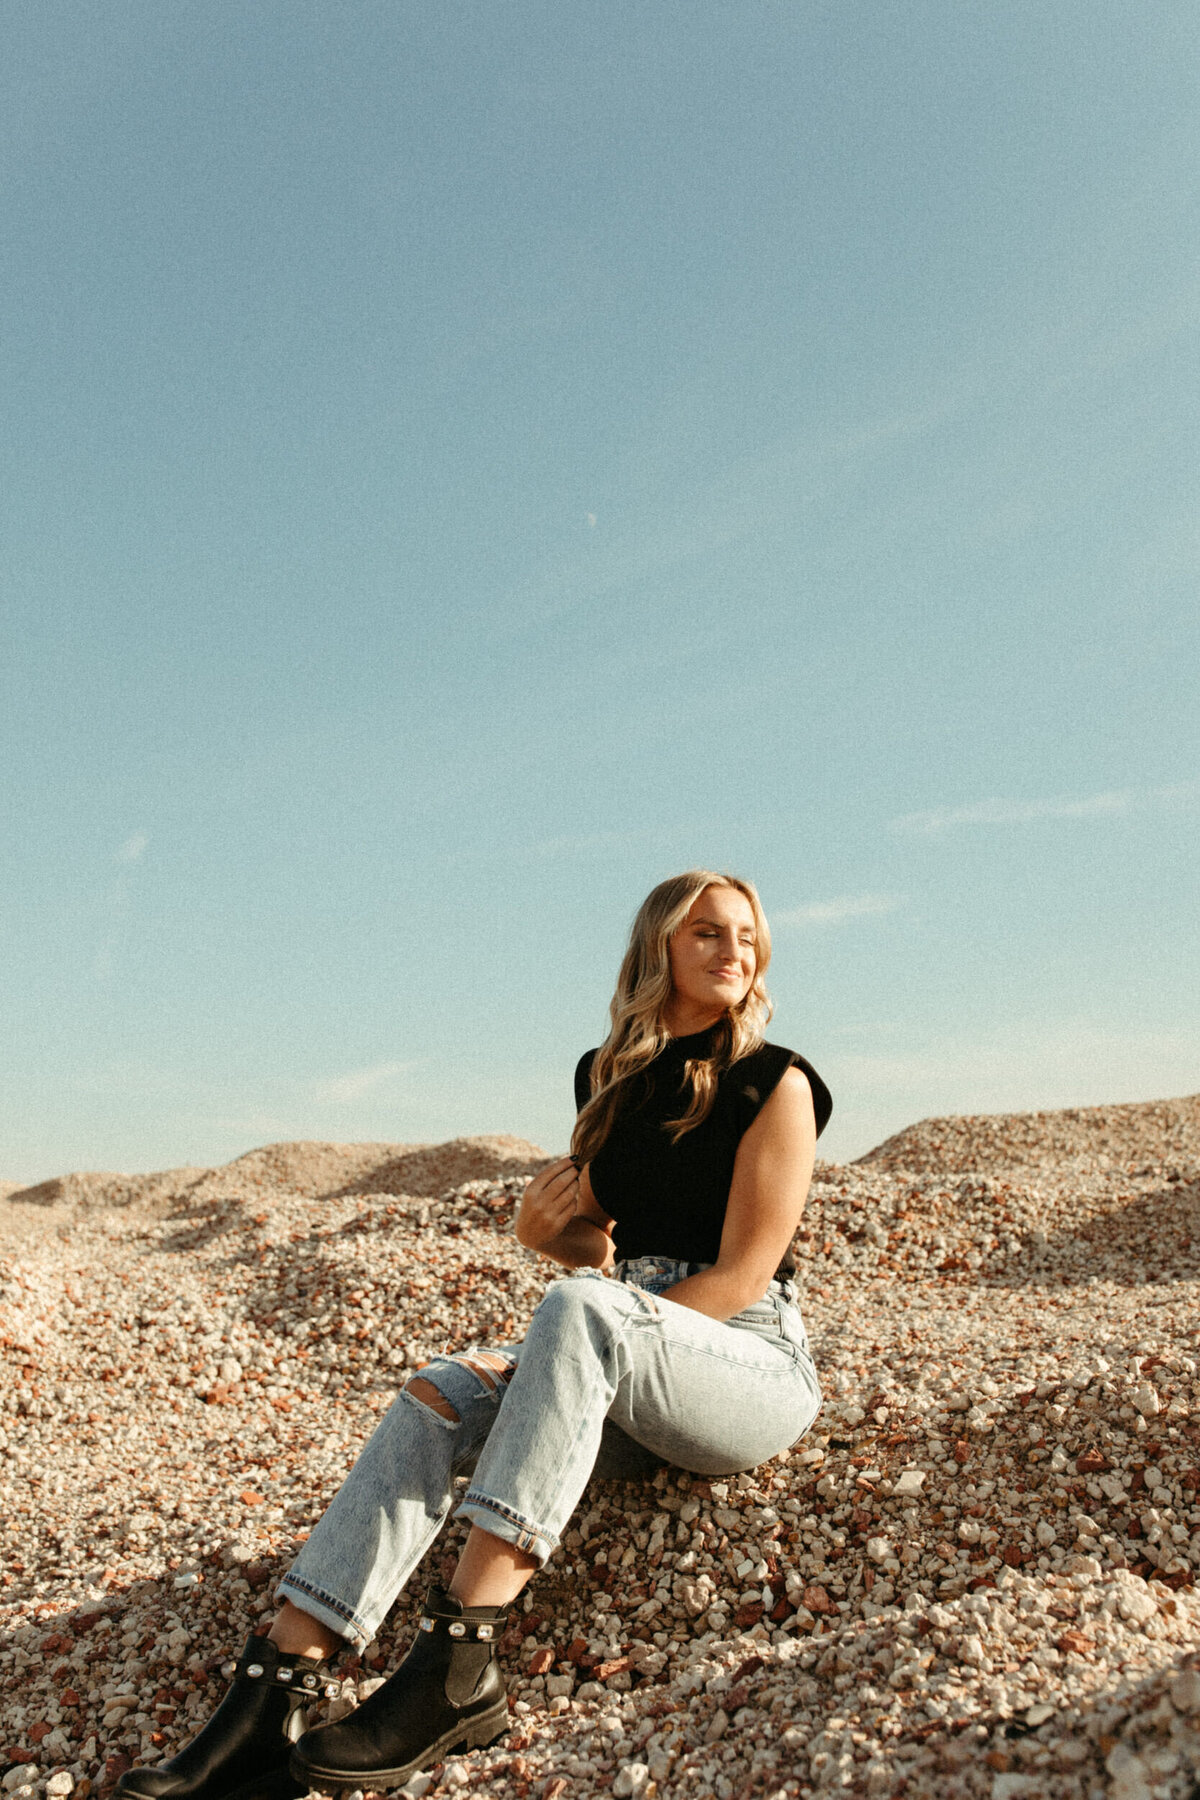 High school senior sitting on top of gravel mound with blue sky behind her